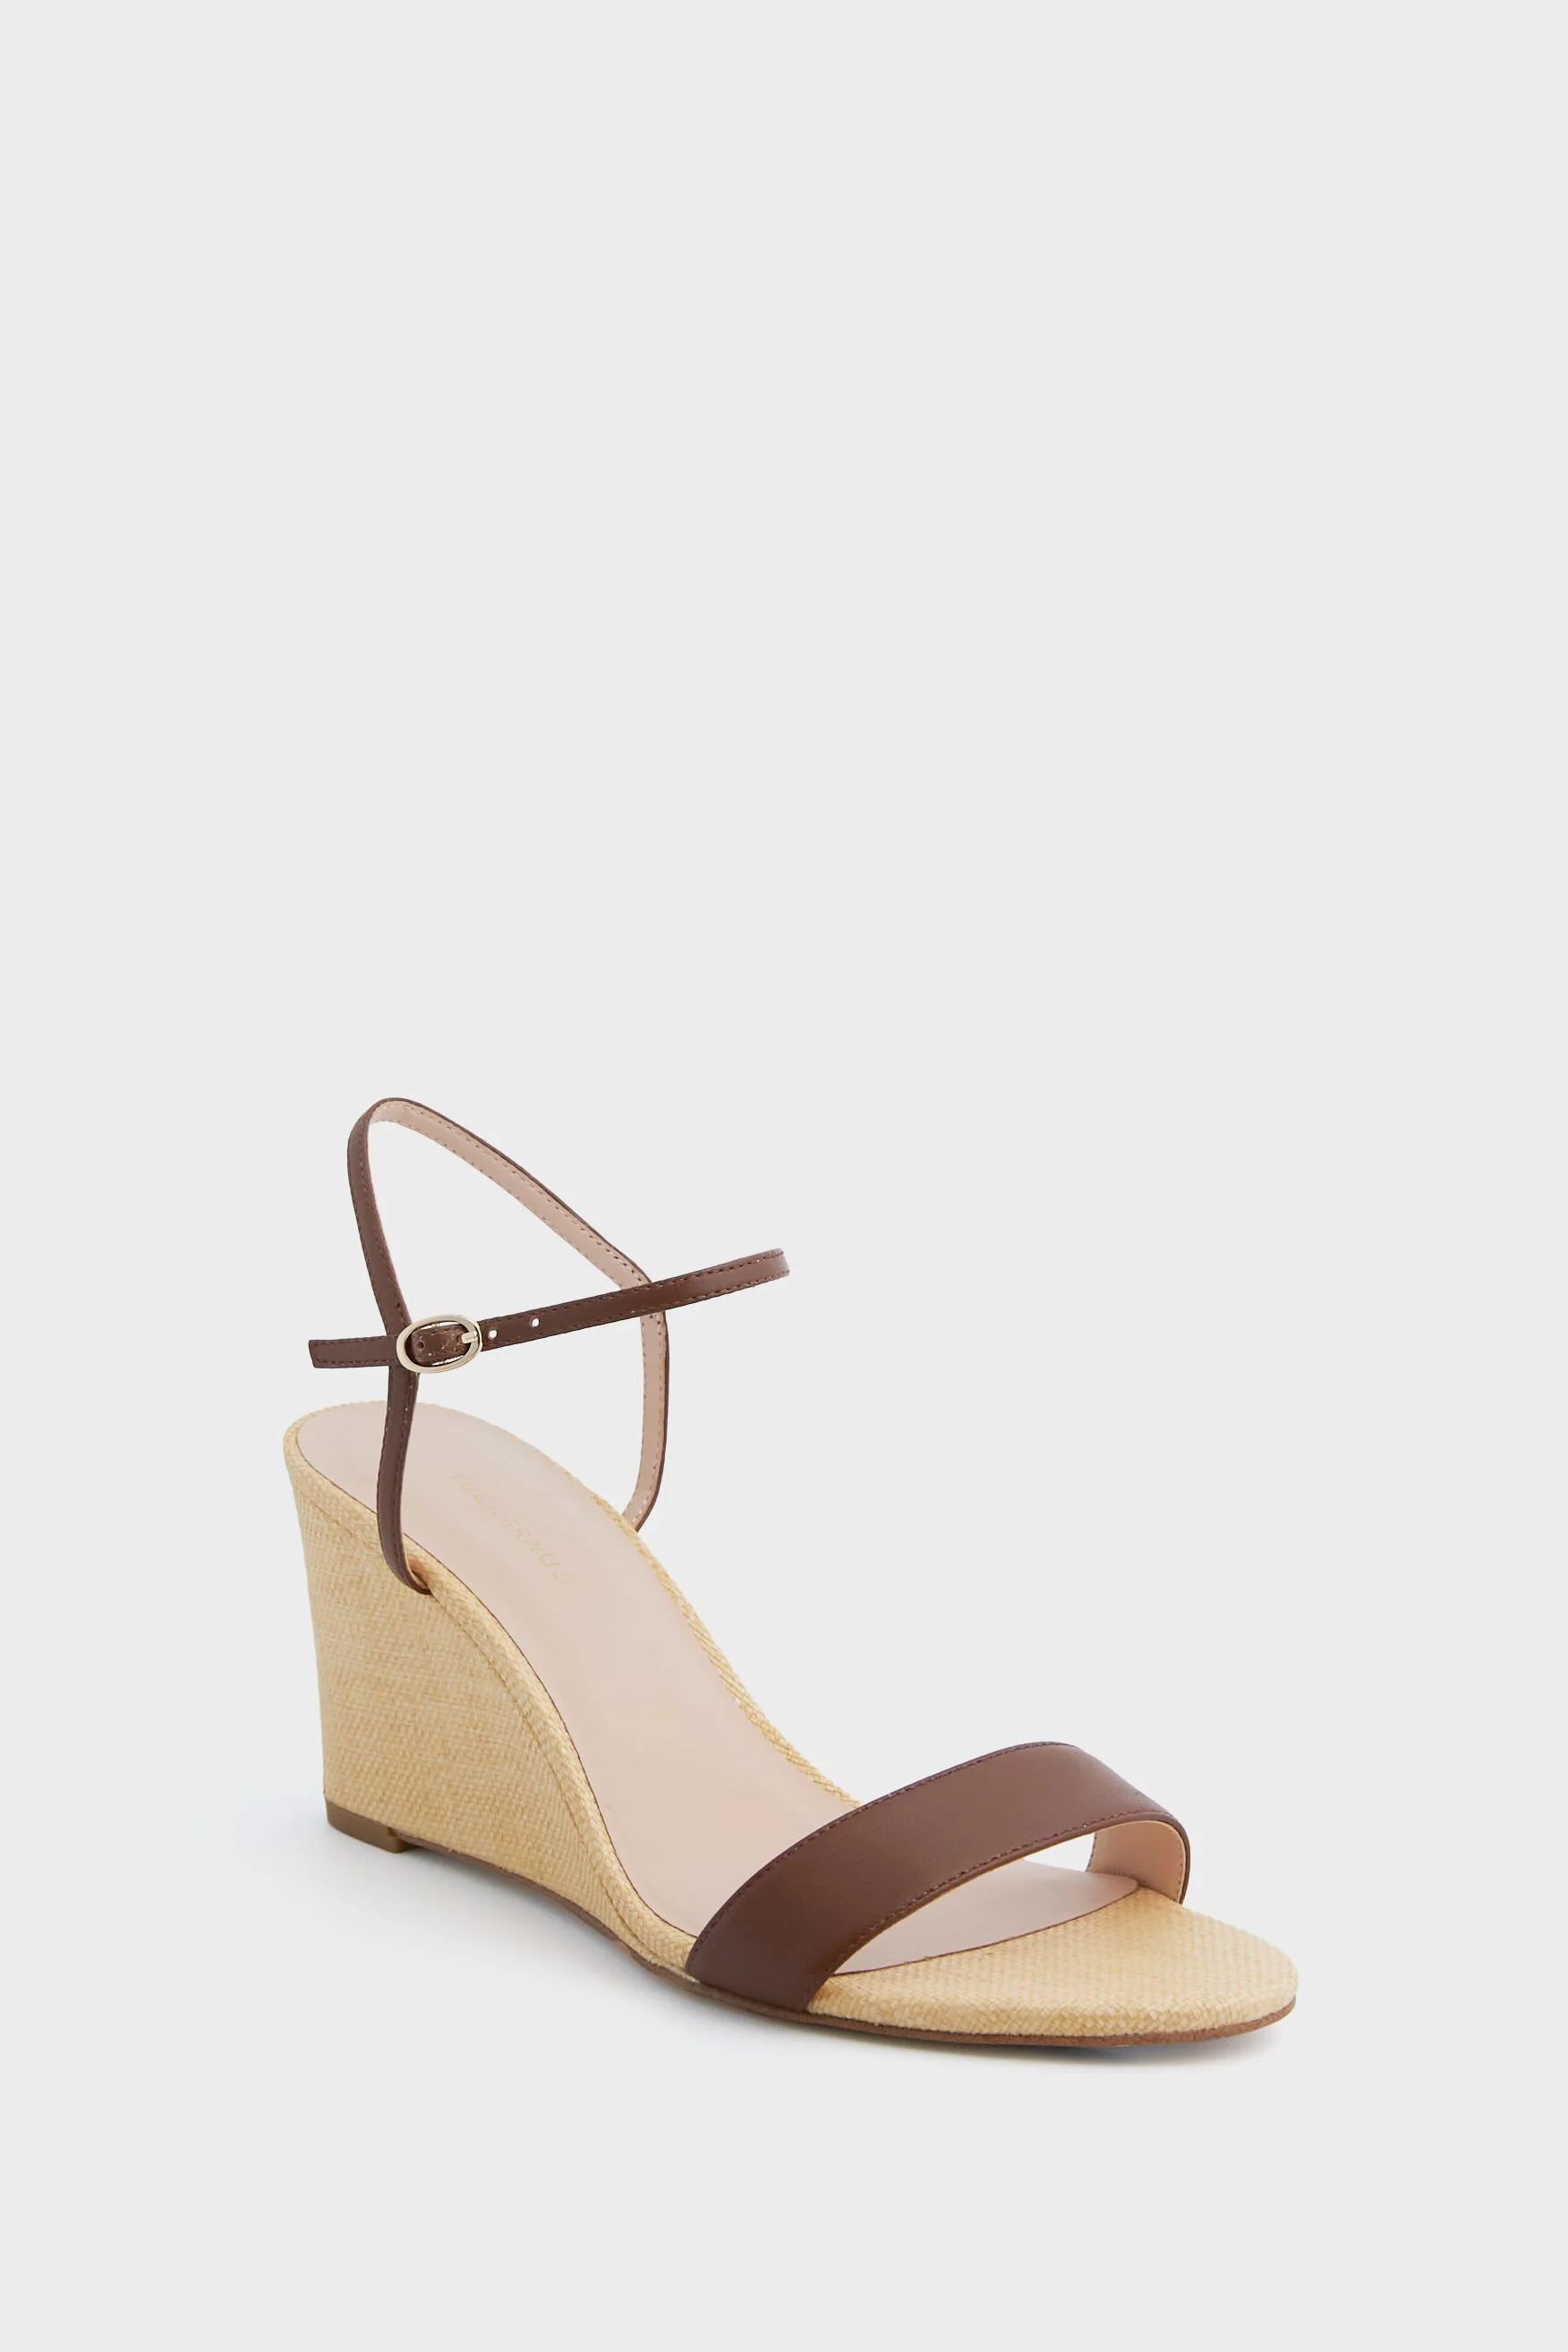 Brown Leather Delphine Wedges | Tuckernuck (US)